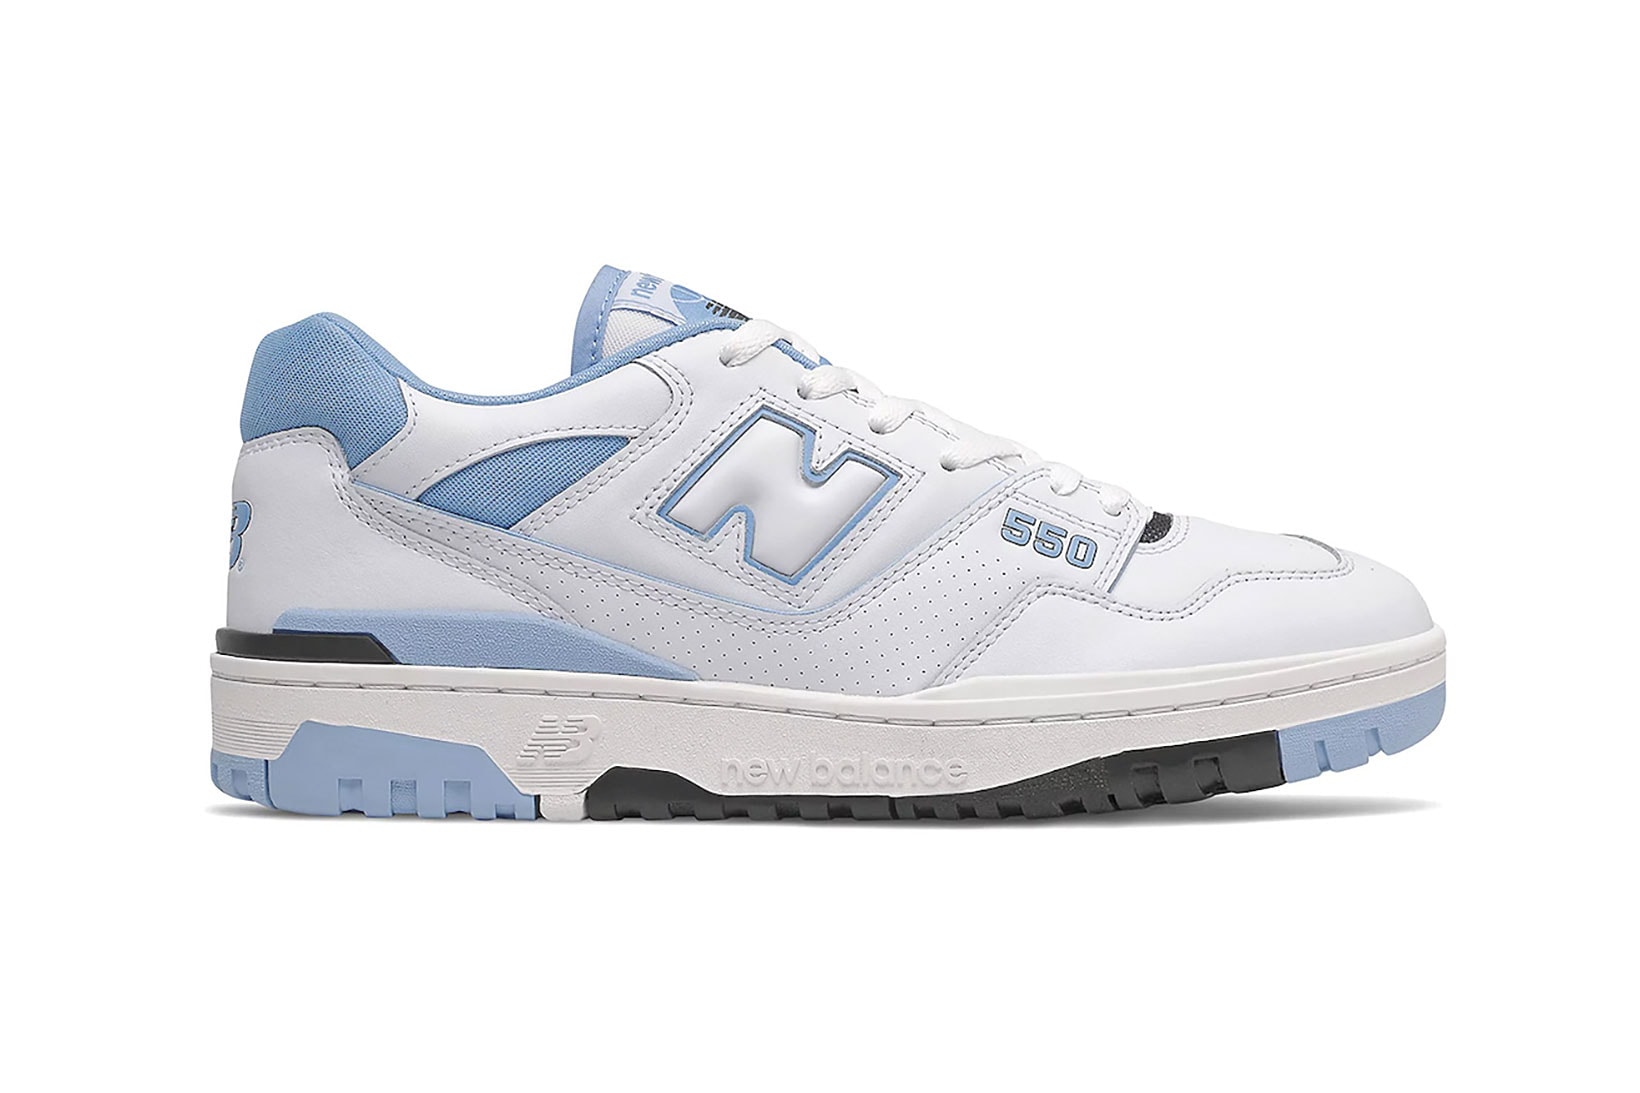 new balance nb 550 unc sneakers light pastel blue white footwear shoes kicks lateral